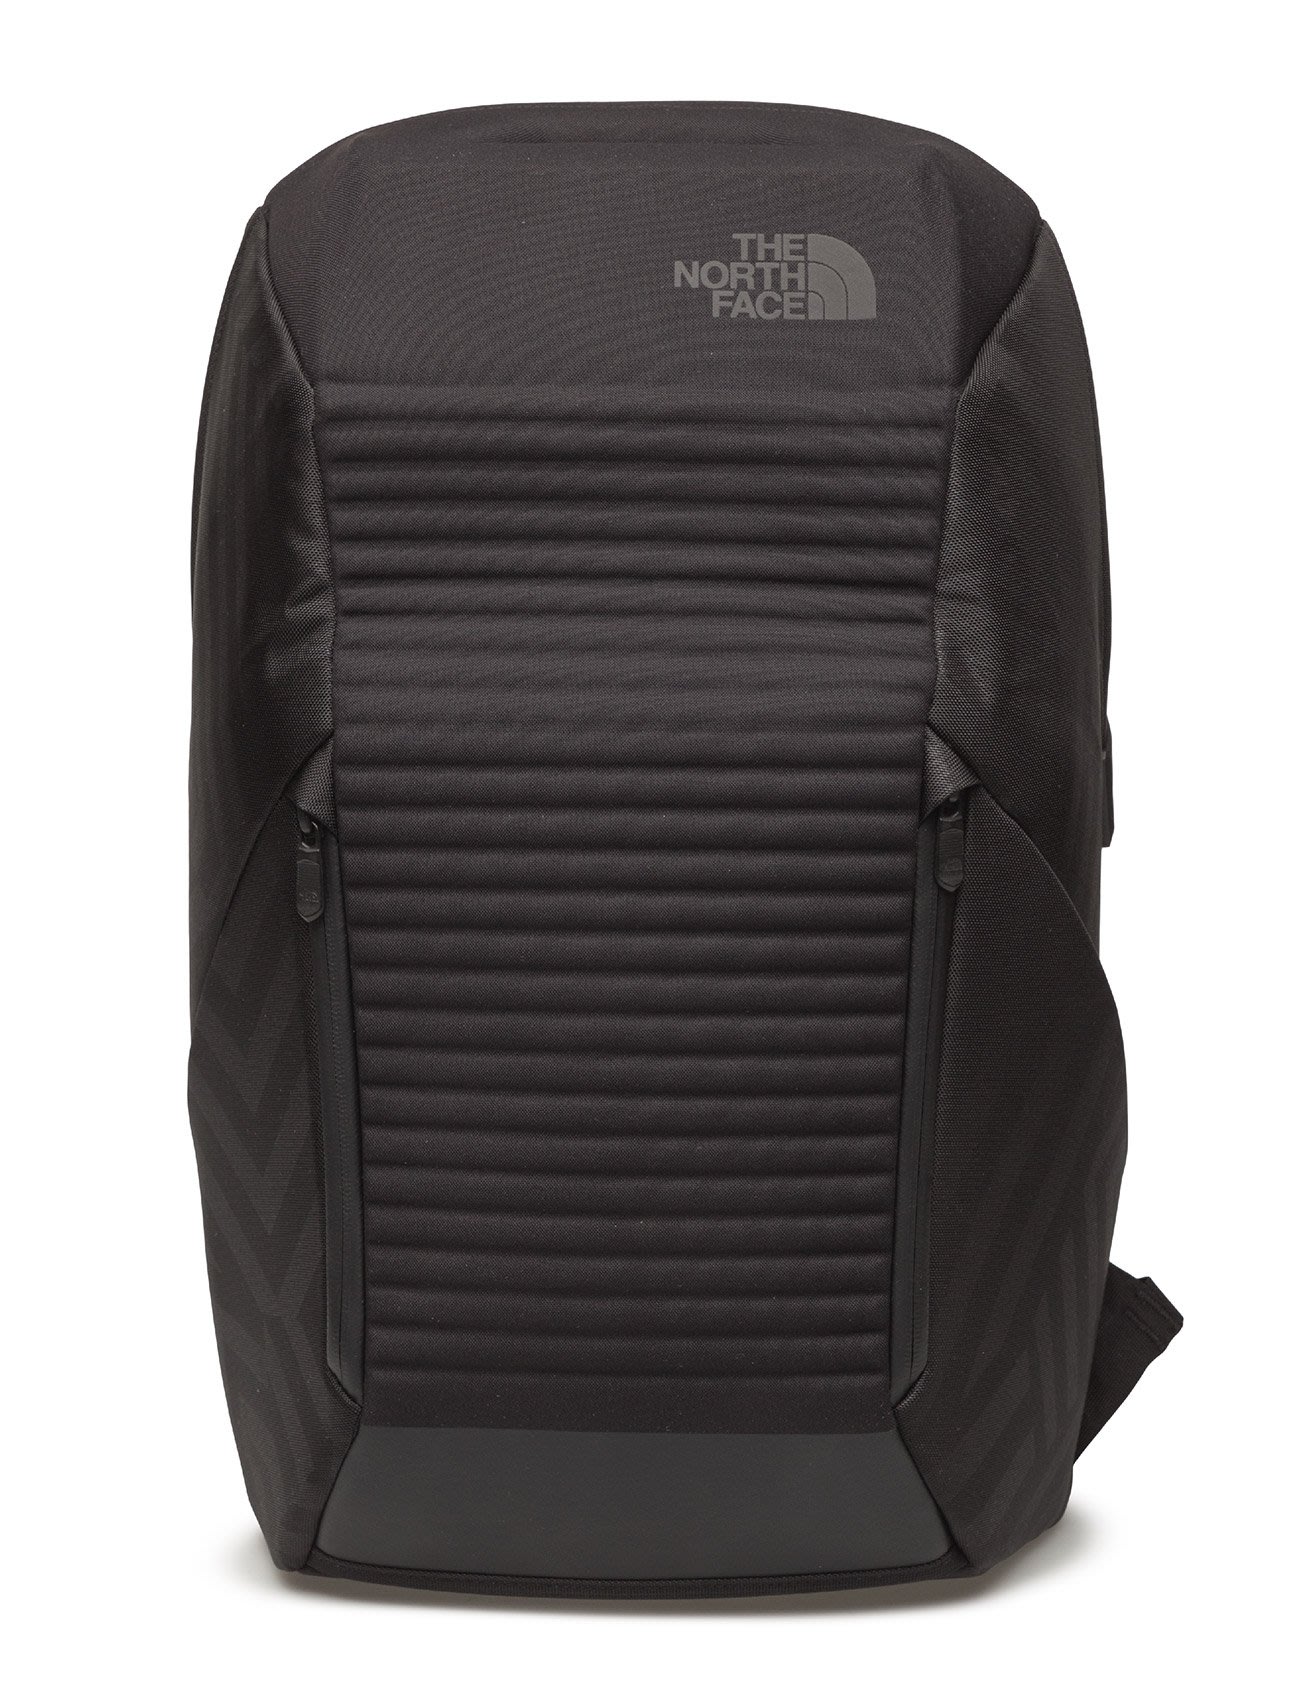 The North Face Access Pack Online Shopping For Women Men Kids Fashion Lifestyle Free Delivery Returns